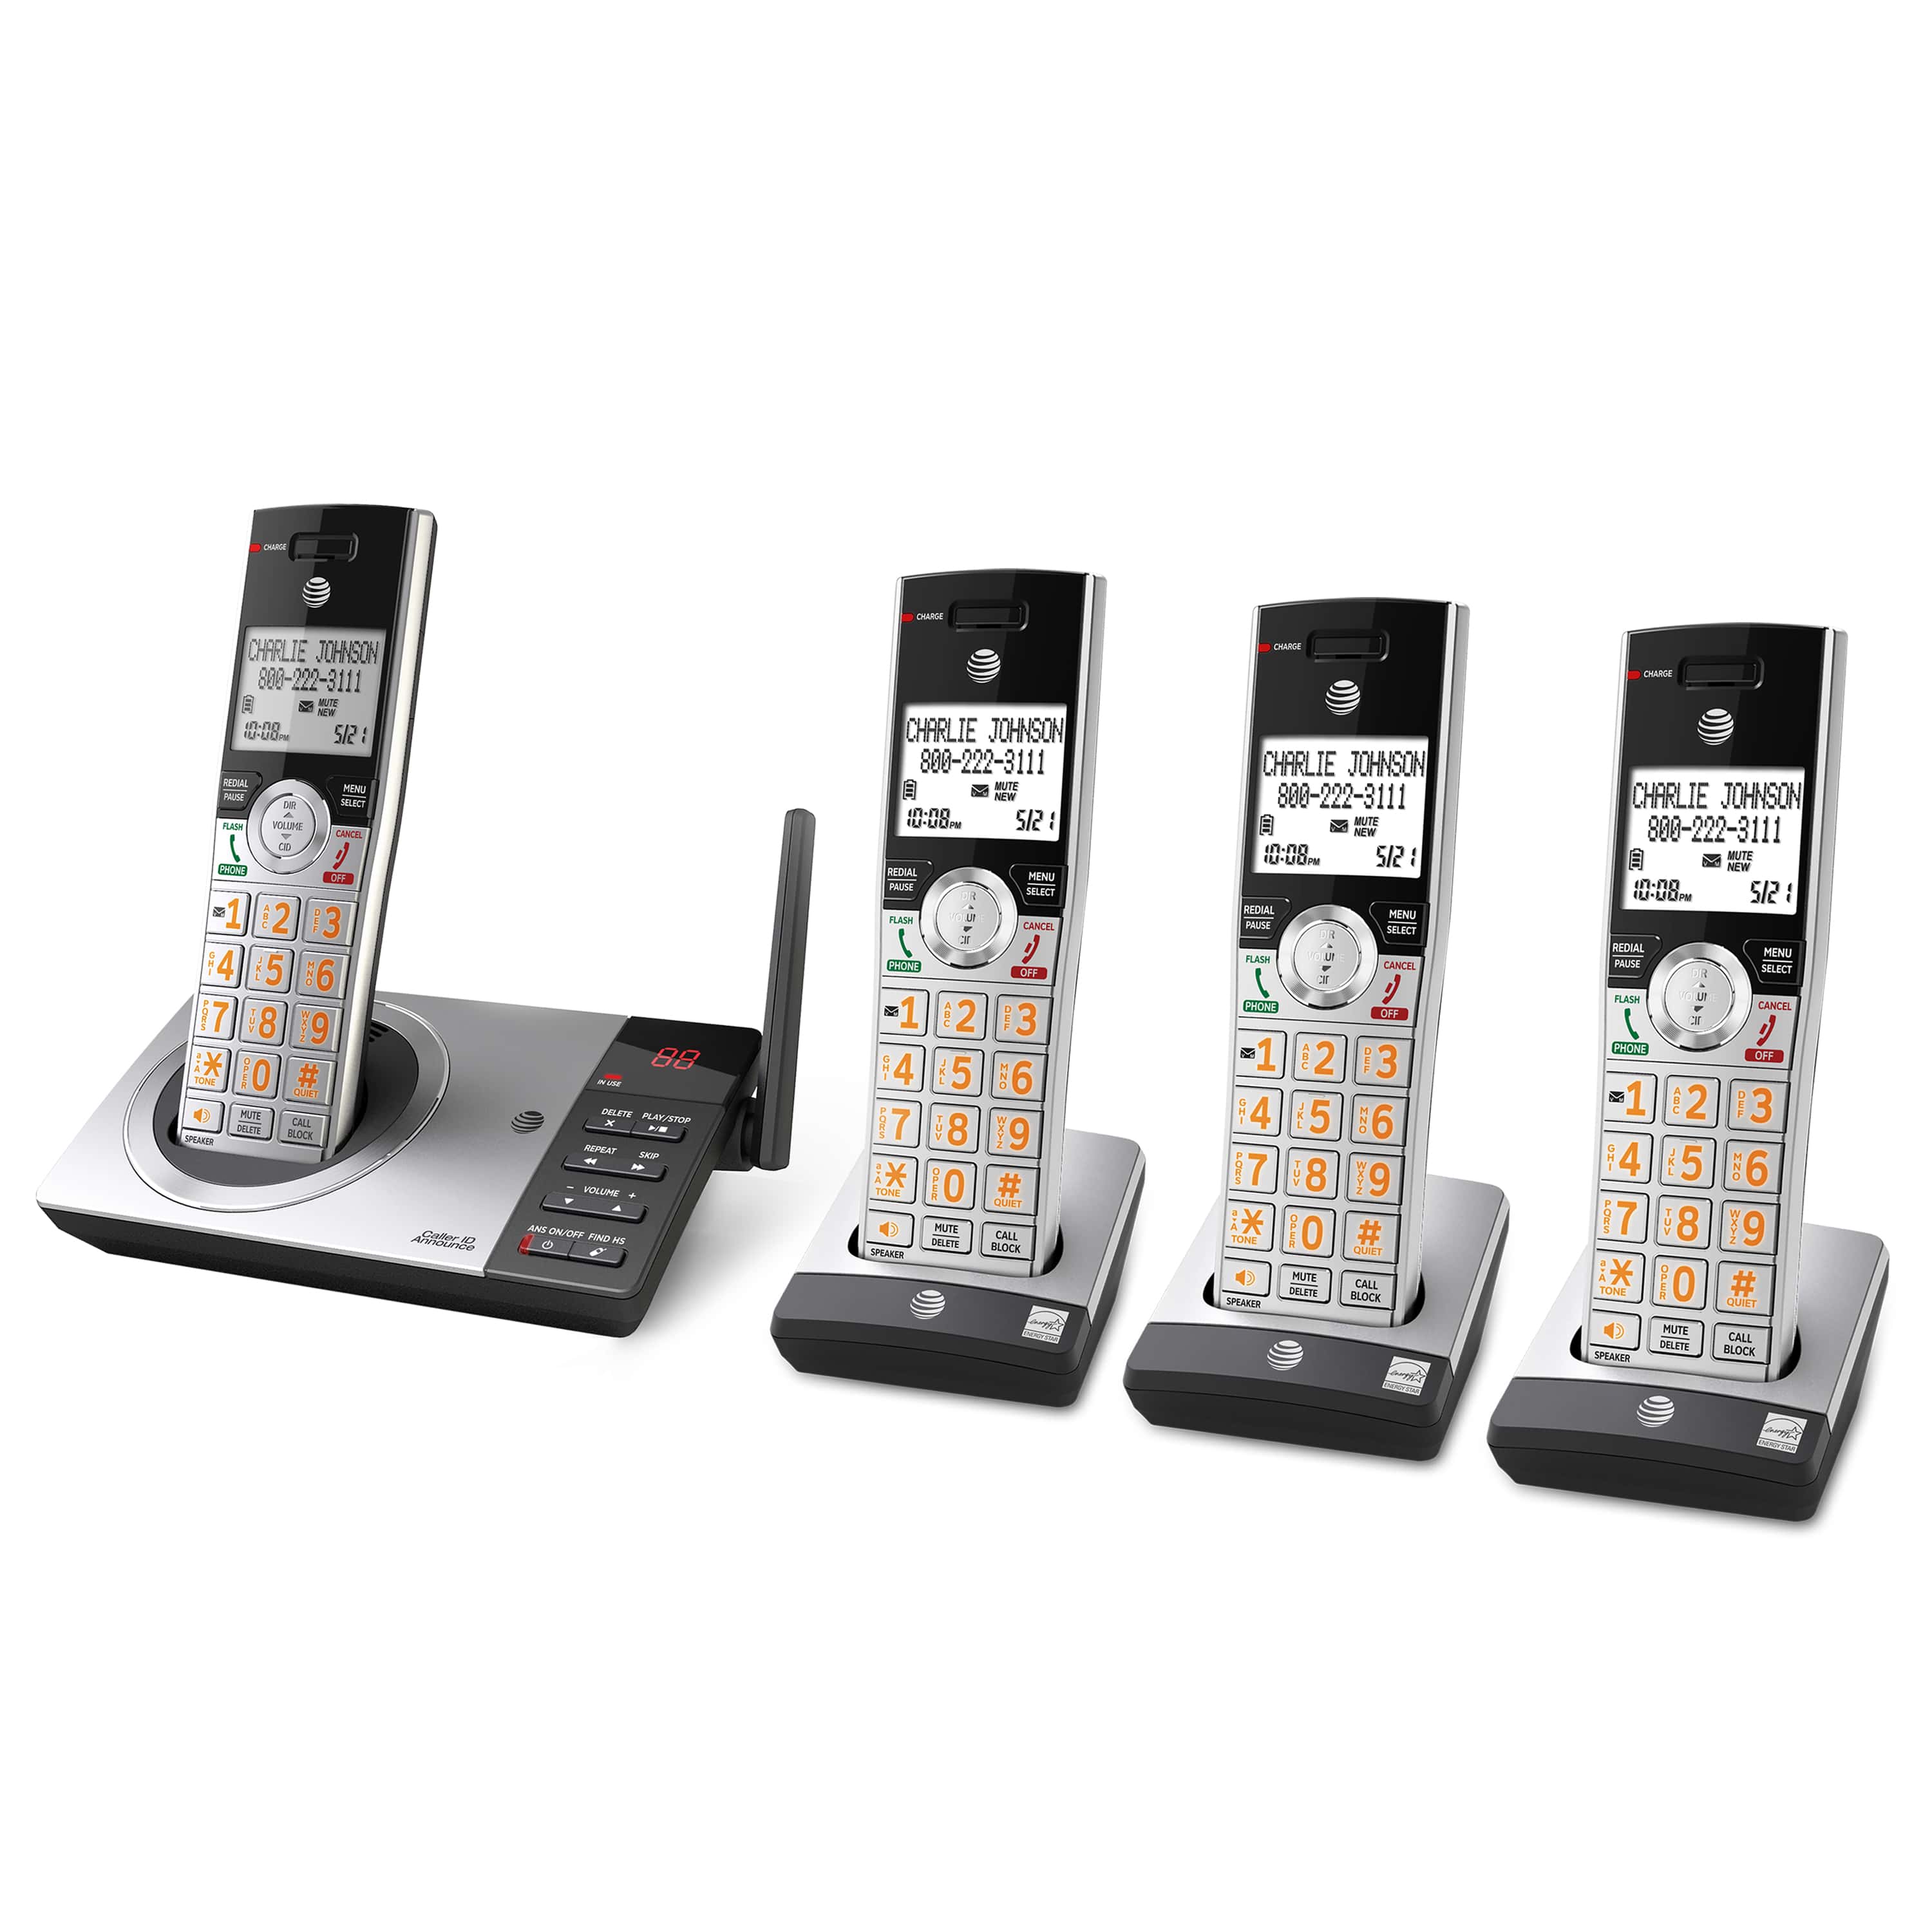 4 handset cordless answering system with smart call blocker - view 2